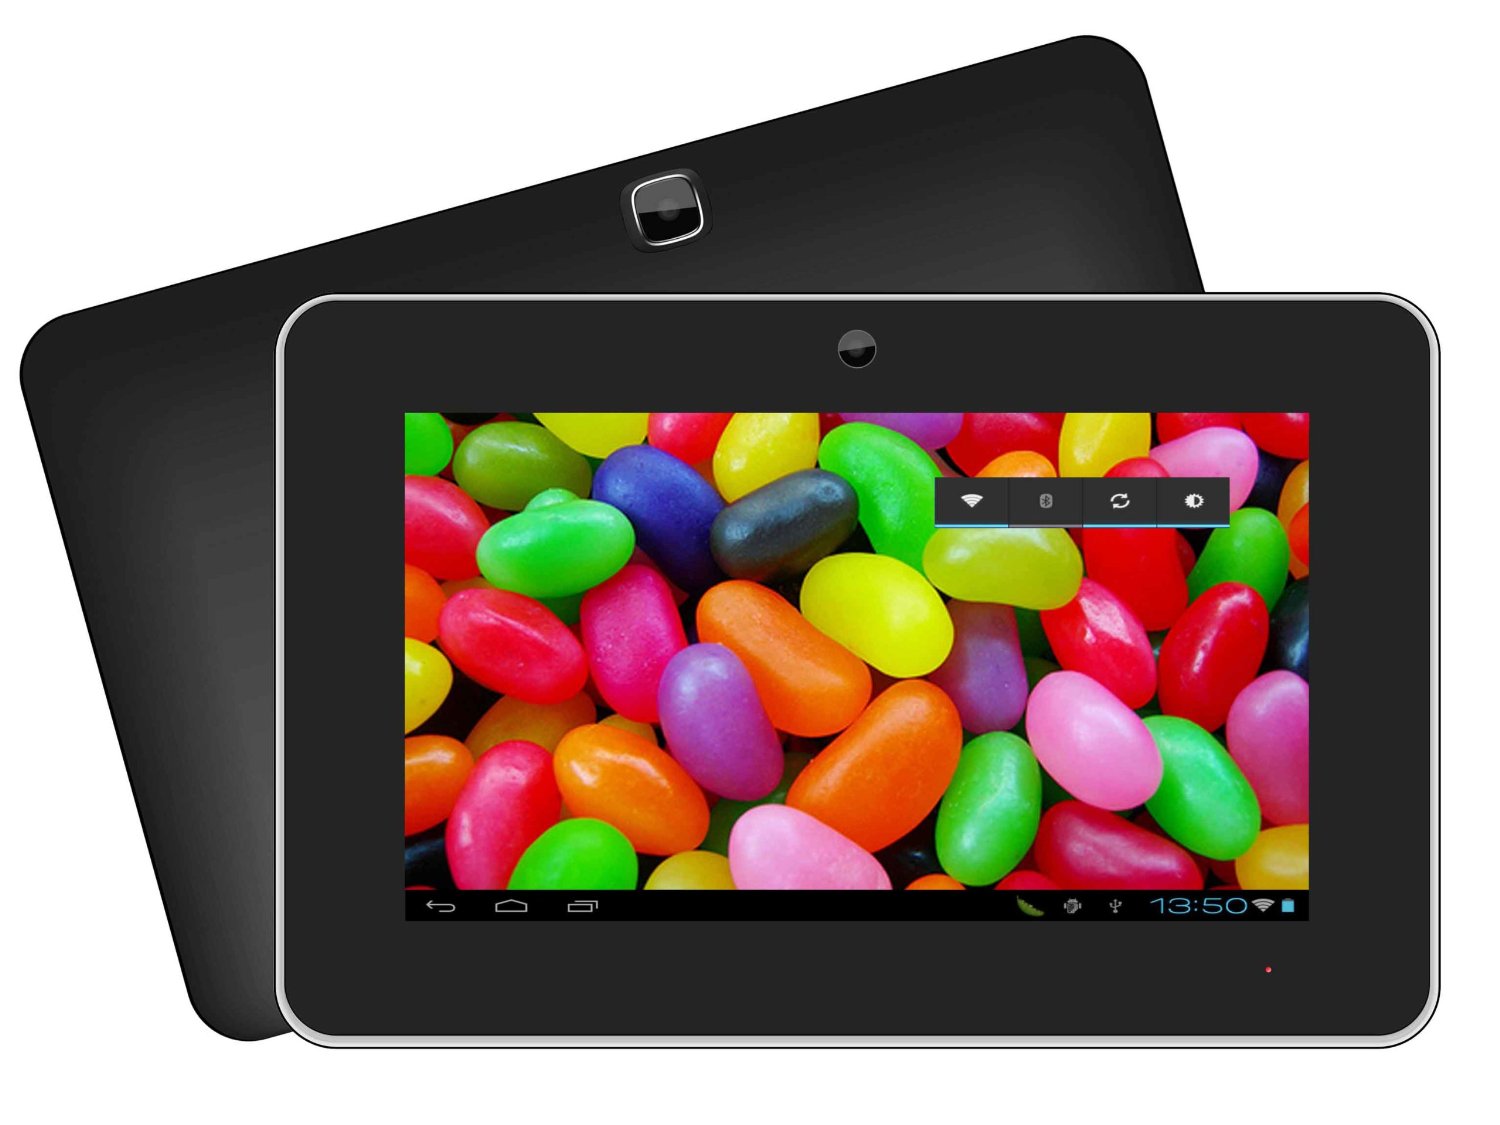 SC-1009JB Supersonic 9" Android 4.1 Touch Screen Display